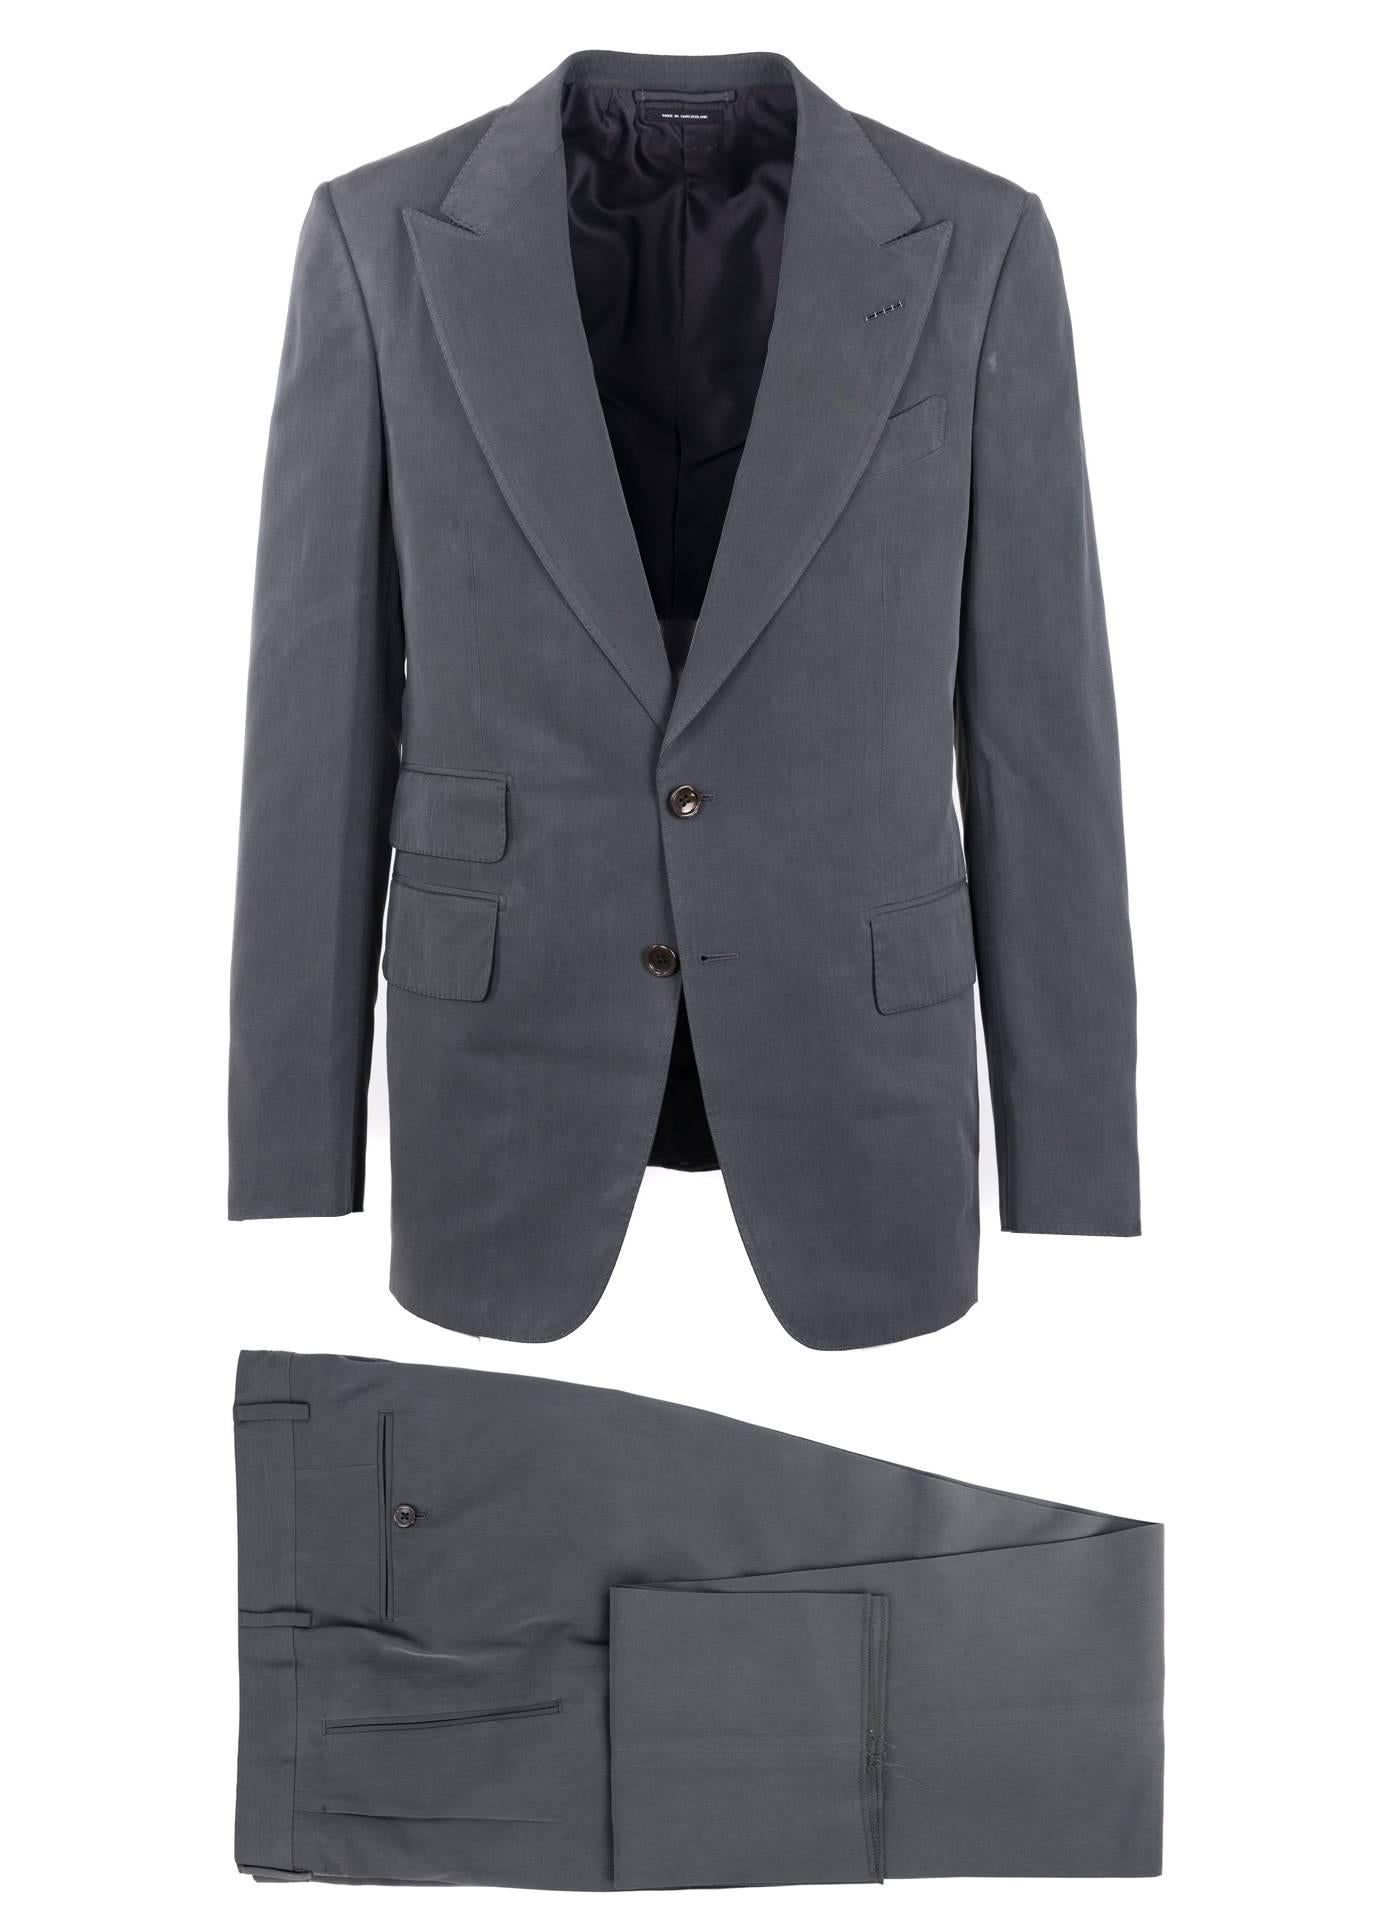 The signature Tom Ford Shelton suit updated in a 100% silk textile with a slate gray color tone. This constructed Shelton base jacket is finished with notch lapels with flap pockets in a two button silhouette. The Suit has a soft and smooth finish